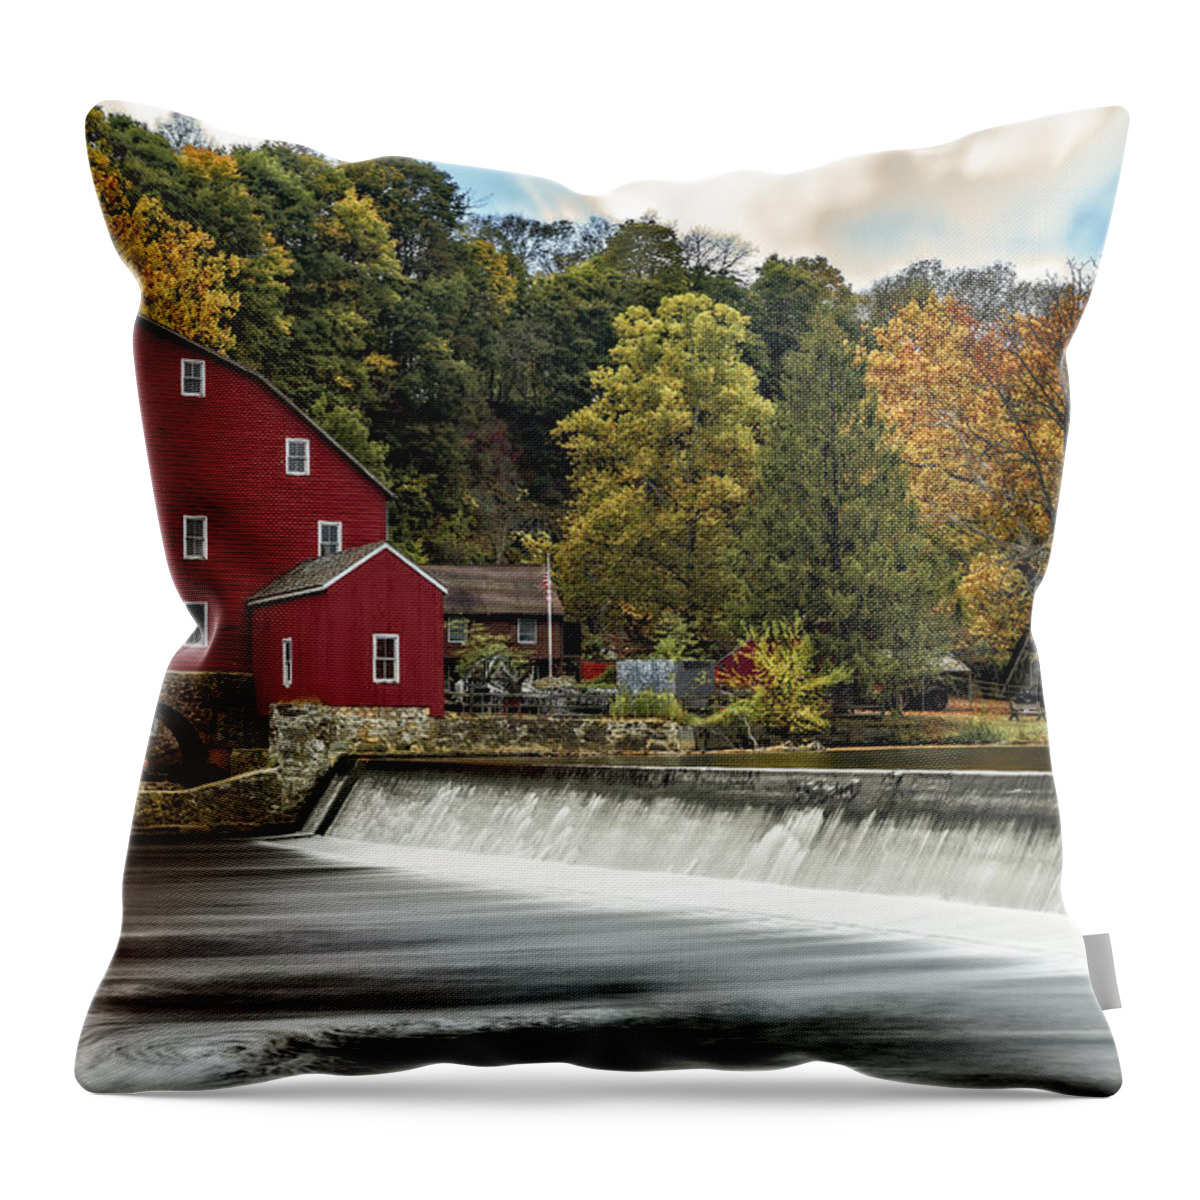 Clinton Throw Pillow featuring the photograph Red Mill At Clinton by Susan Candelario